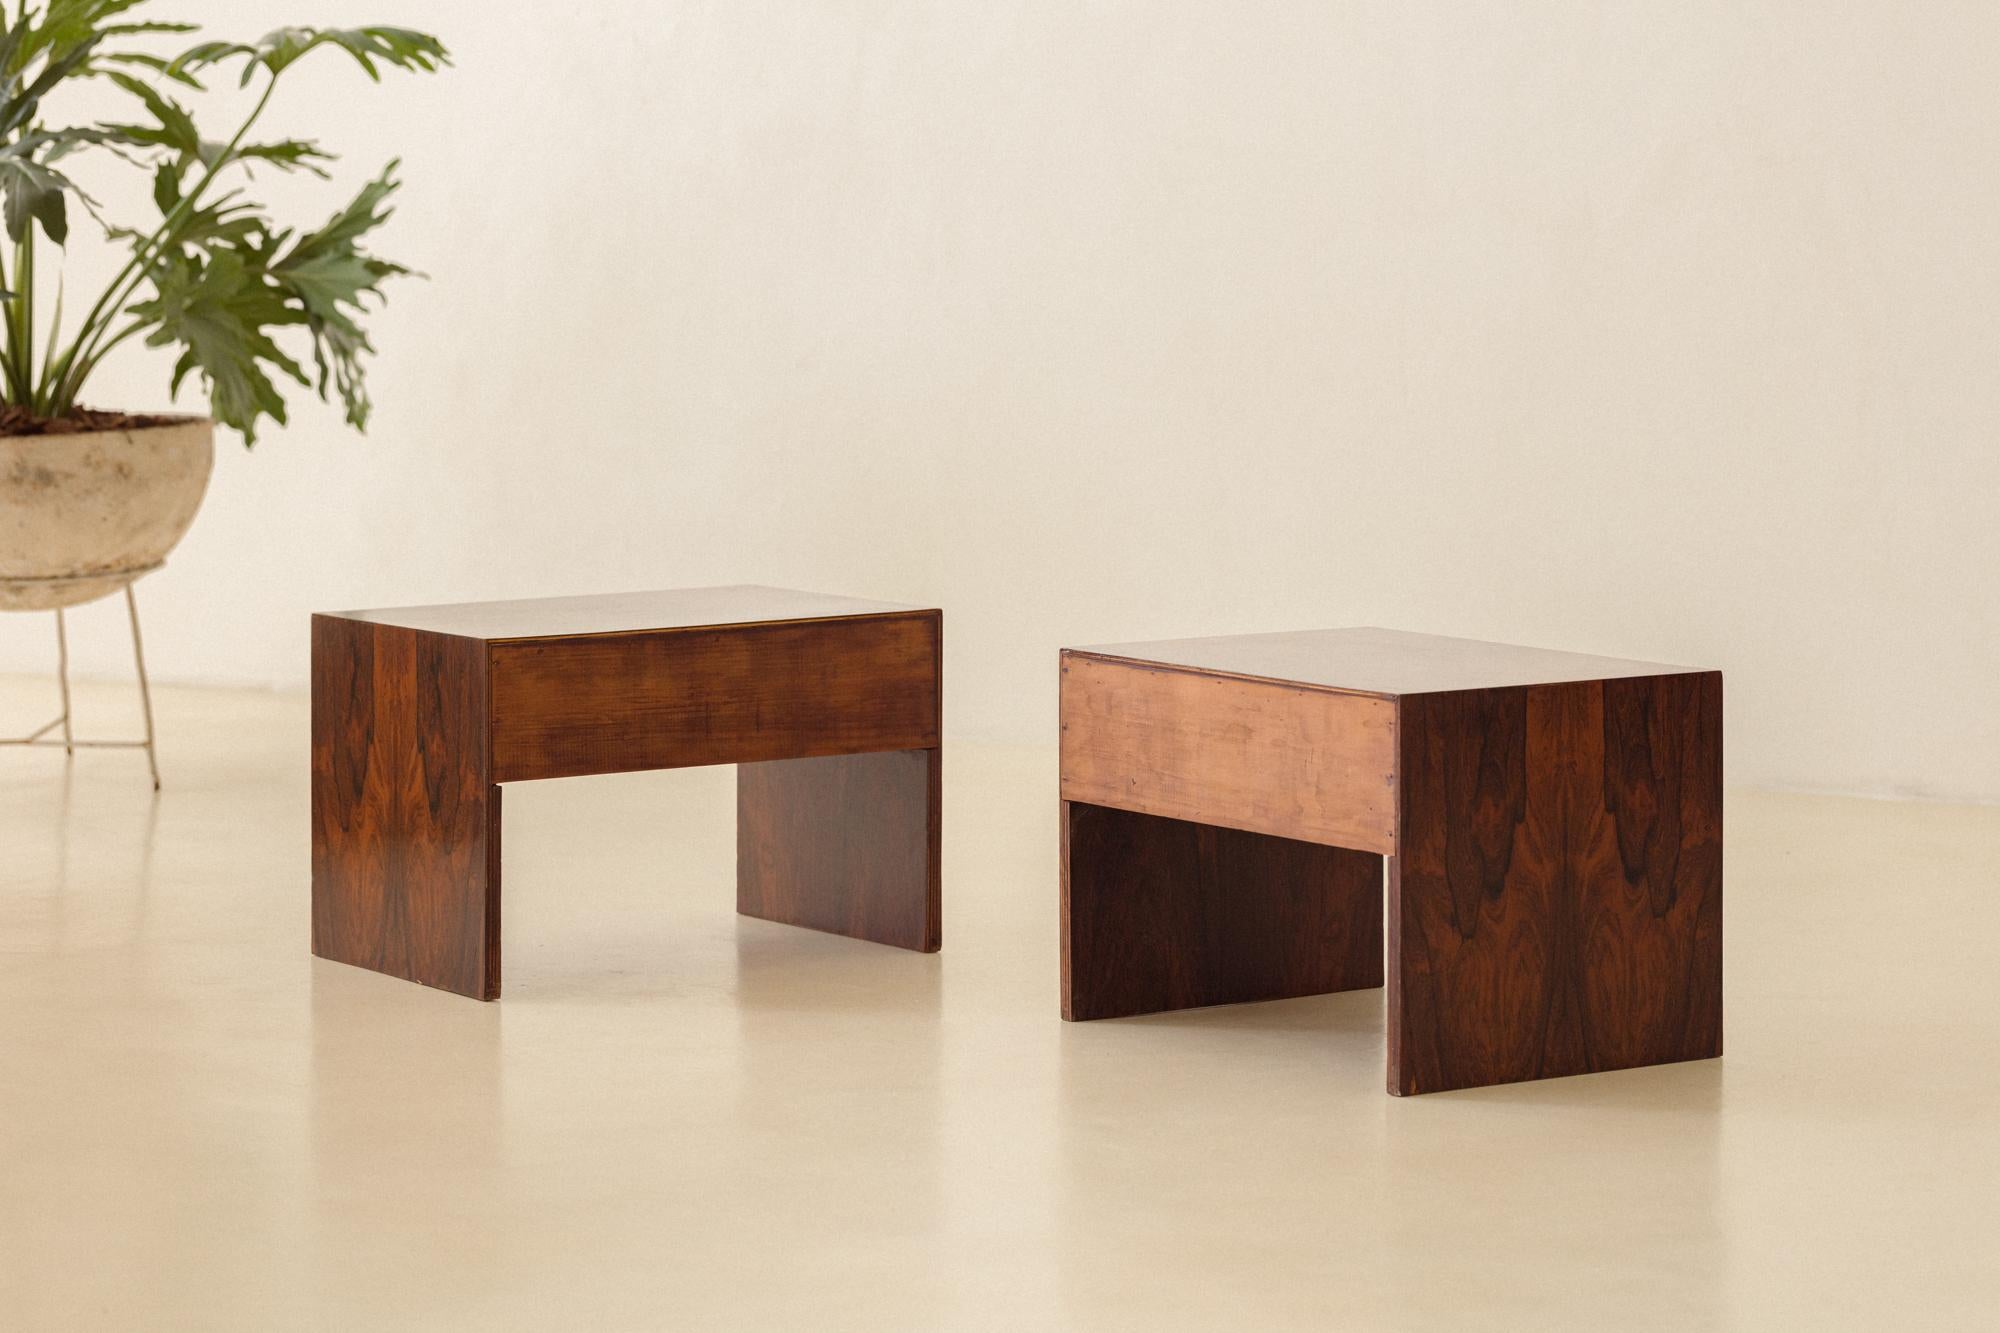 Pair of Rosewood Nightstands by Unknown Designer, 1960s, Brazilian Midcentury For Sale 9